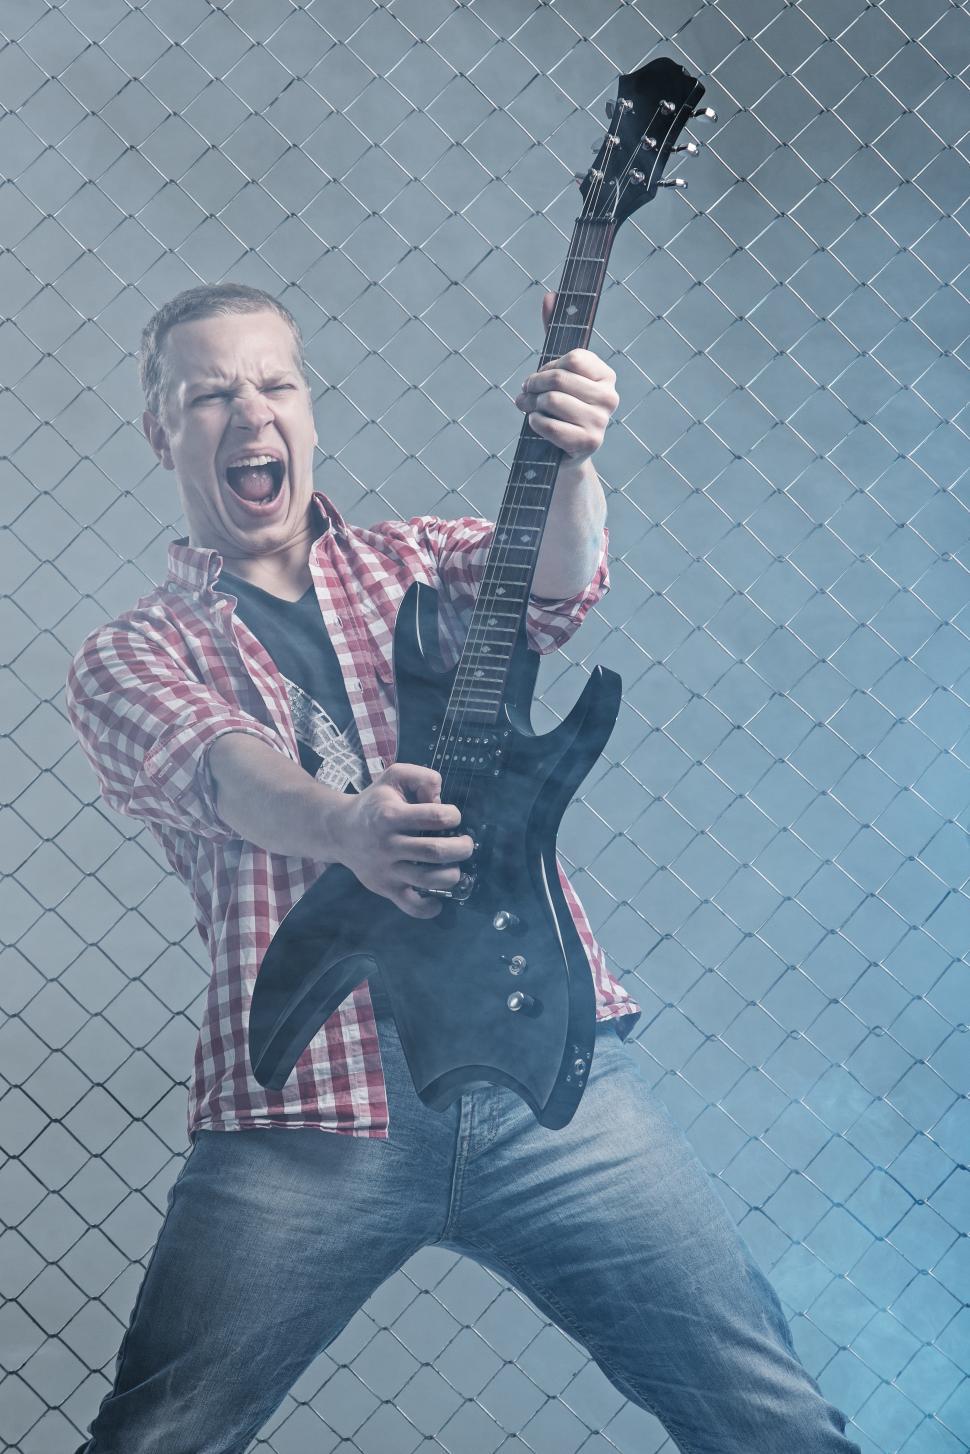 Free Image of Music. Young musician with a guitar on fence background 